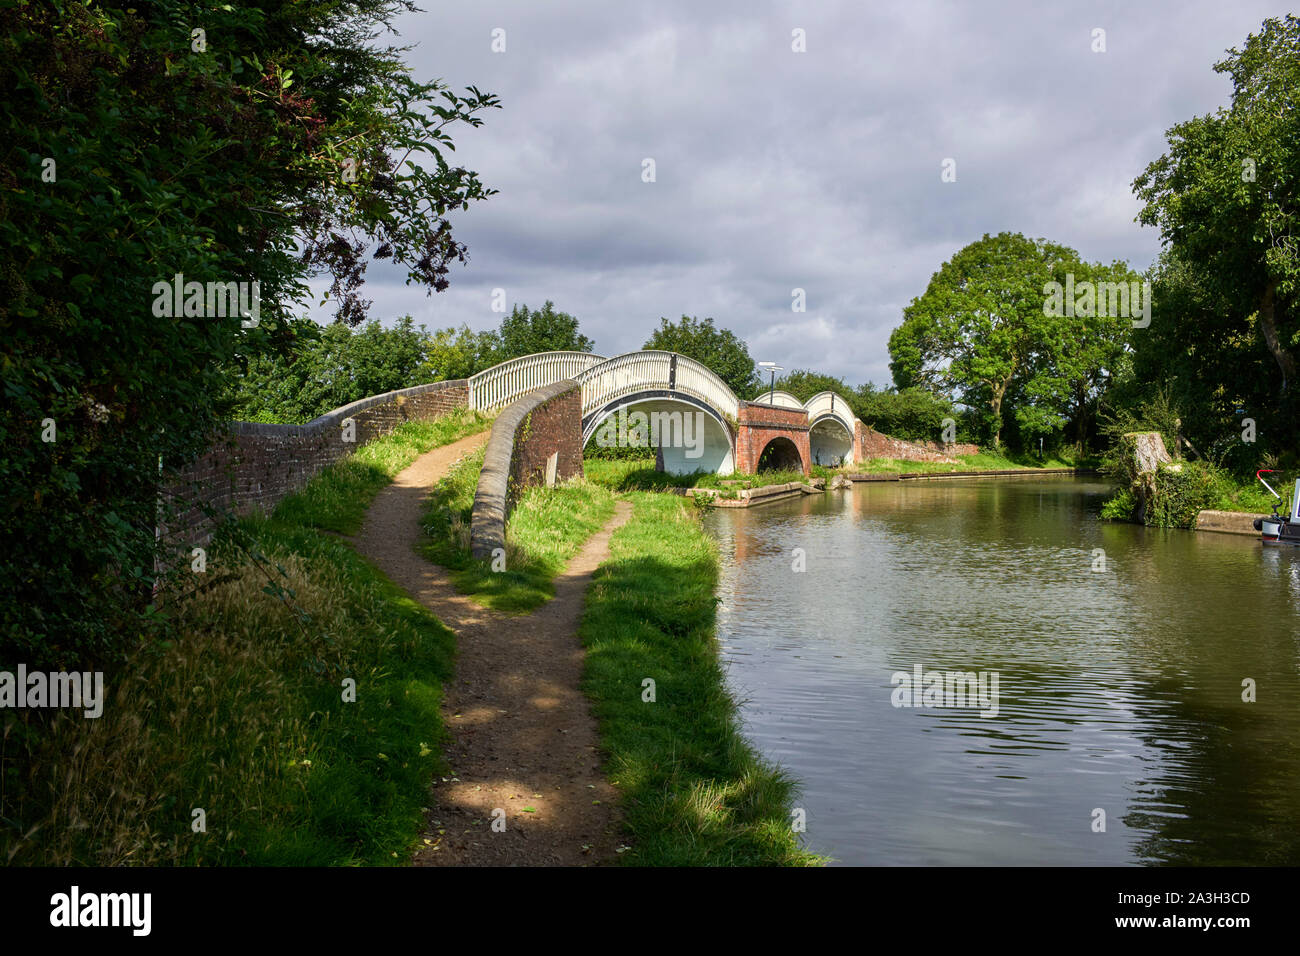 The double cast iron bridges at Braunston junction on the Grand Union Canal Stock Photo